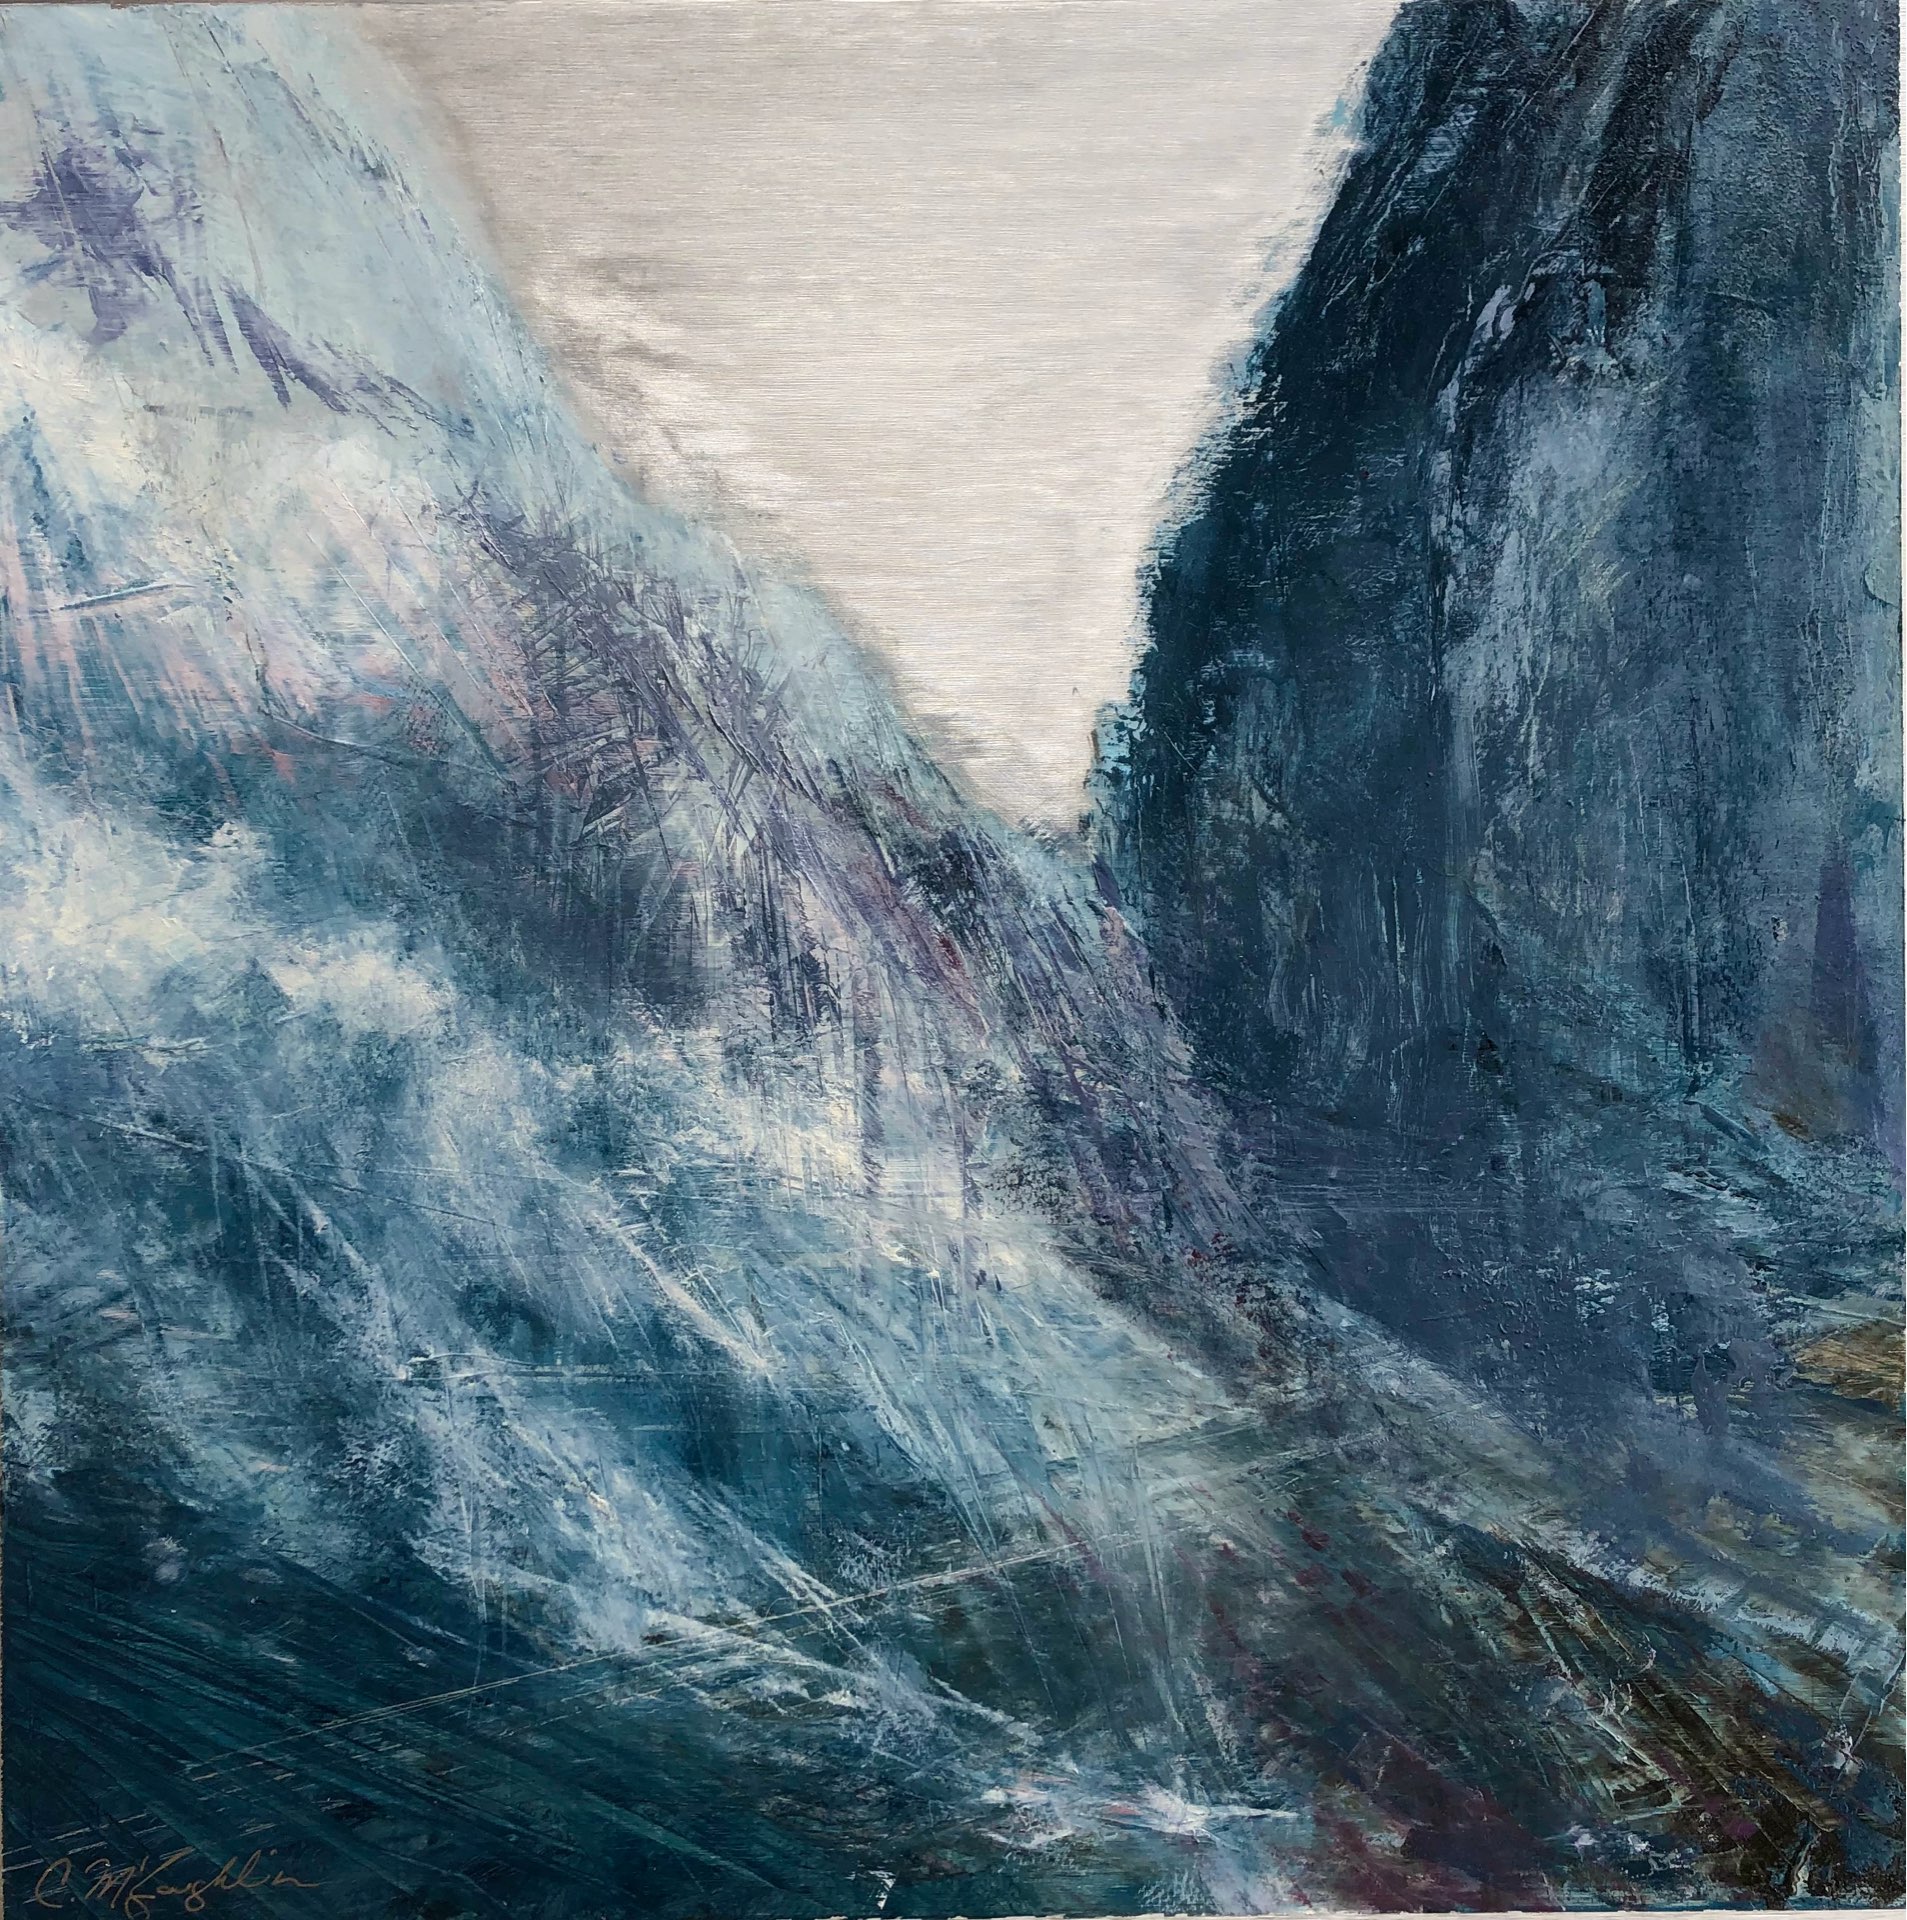 The Space Between, Provo Canyon, Contemporary oil painting on metal of hope in the mountain pass, Fine Art by Cynthia McLoughlin